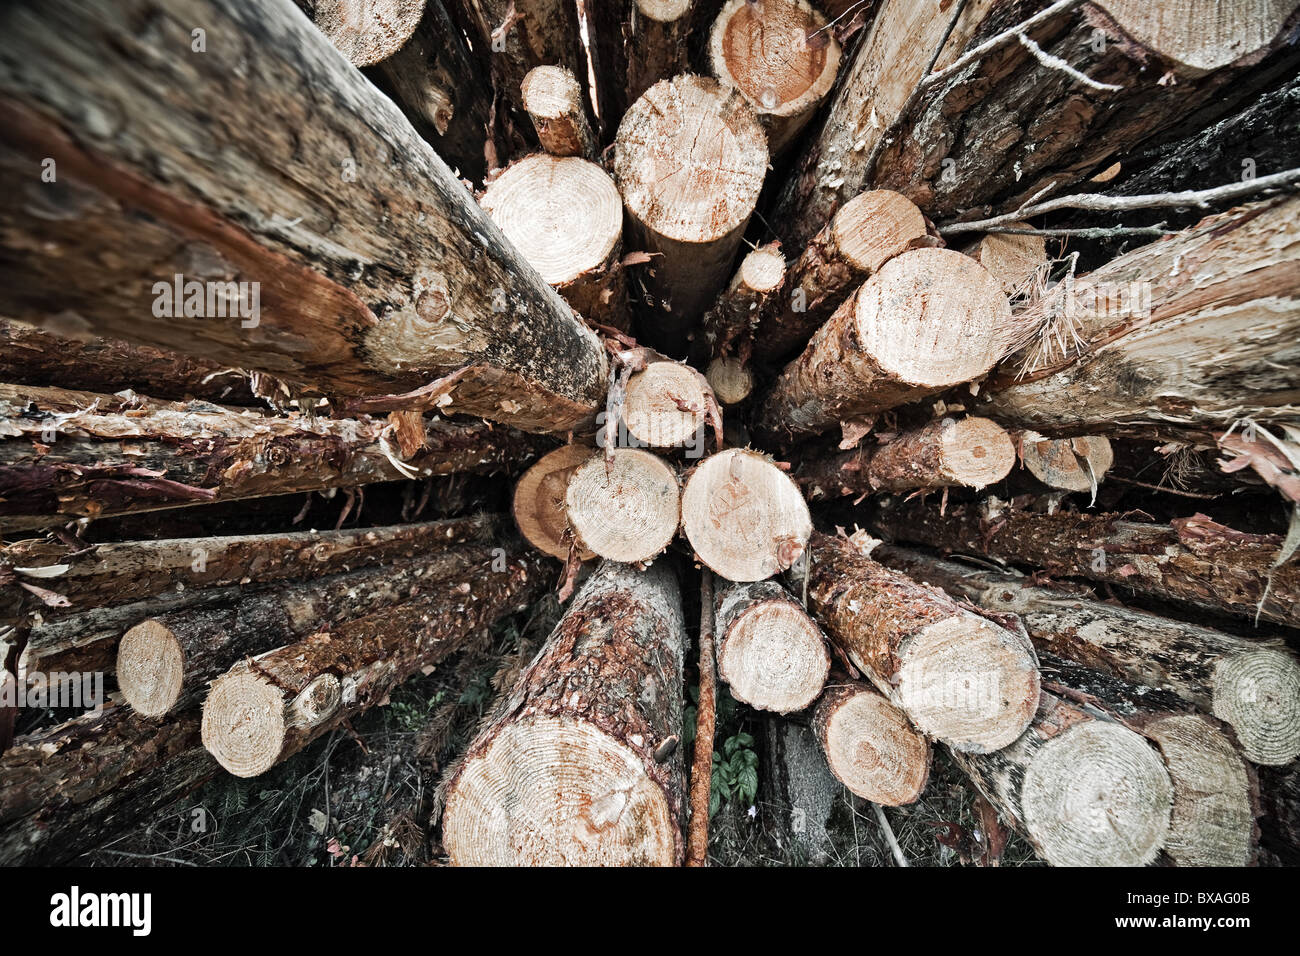 Logs store. Wide angle view. Stock Photo